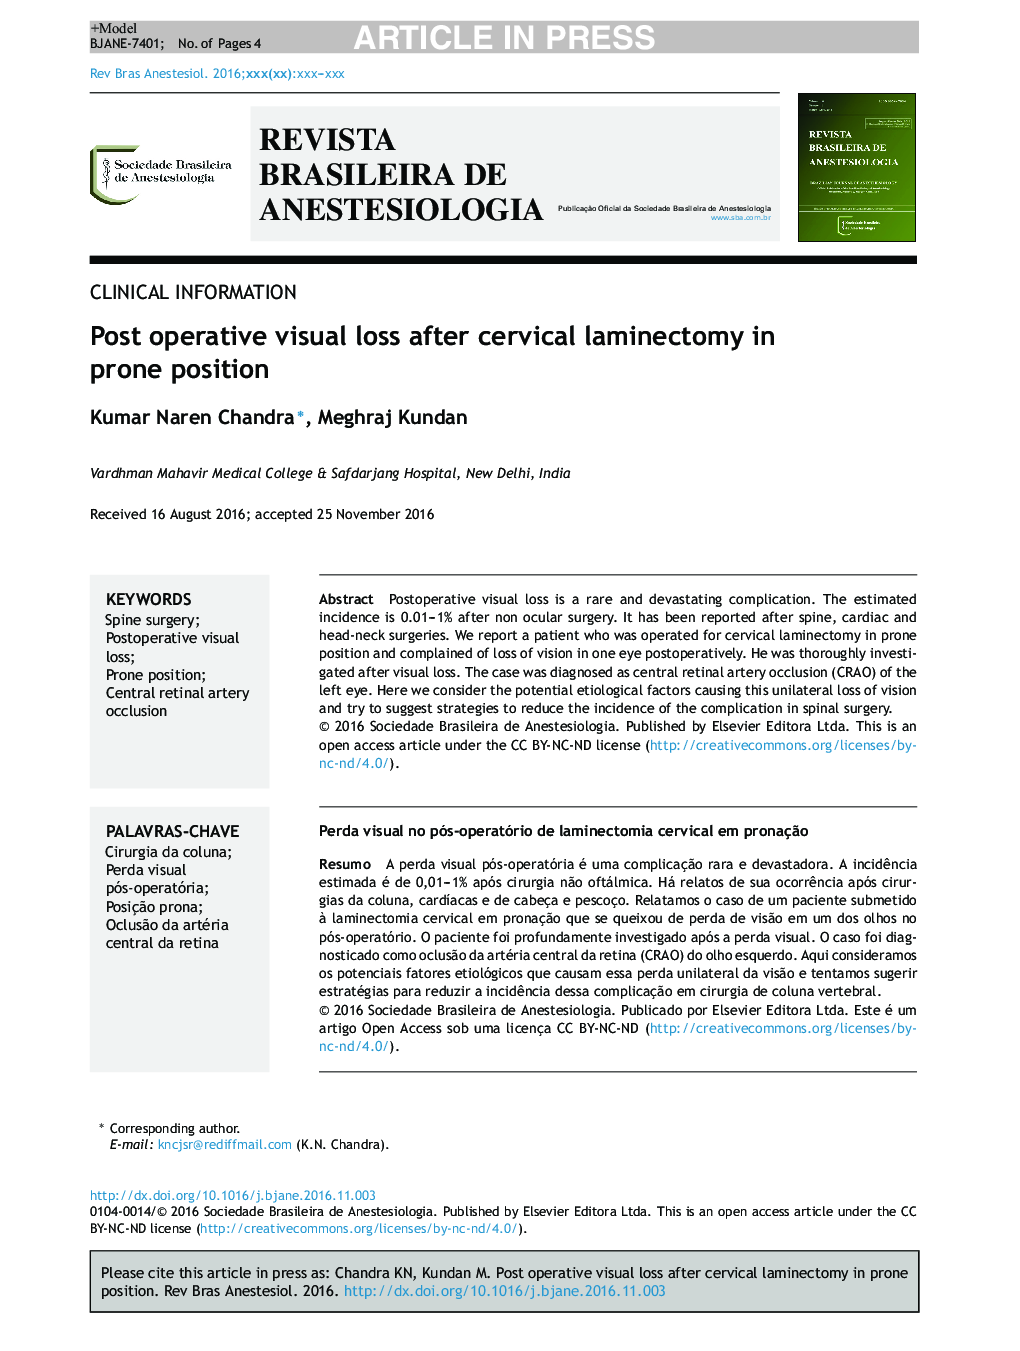 Post operative visual loss after cervical laminectomy in prone position